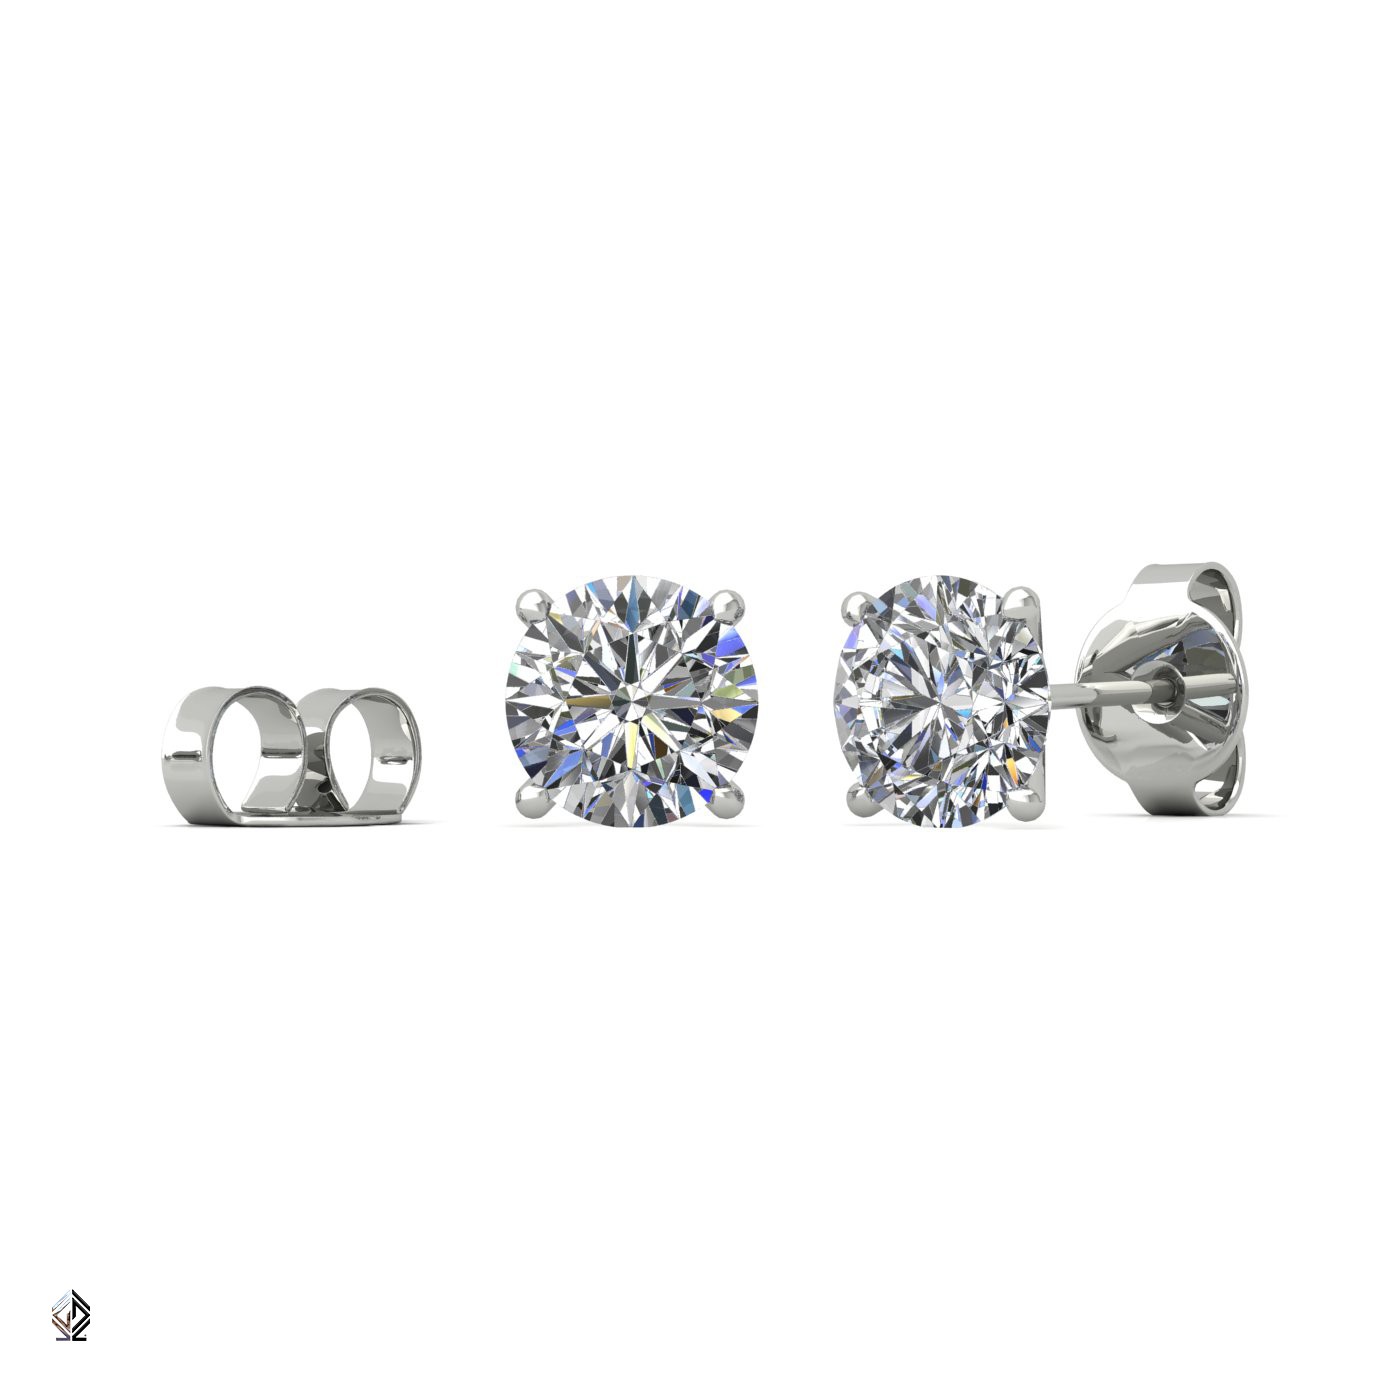 18k white gold 0,3 ct each (0,6 tcw) 4 prongs round cut classic diamond earring studs Photos & images